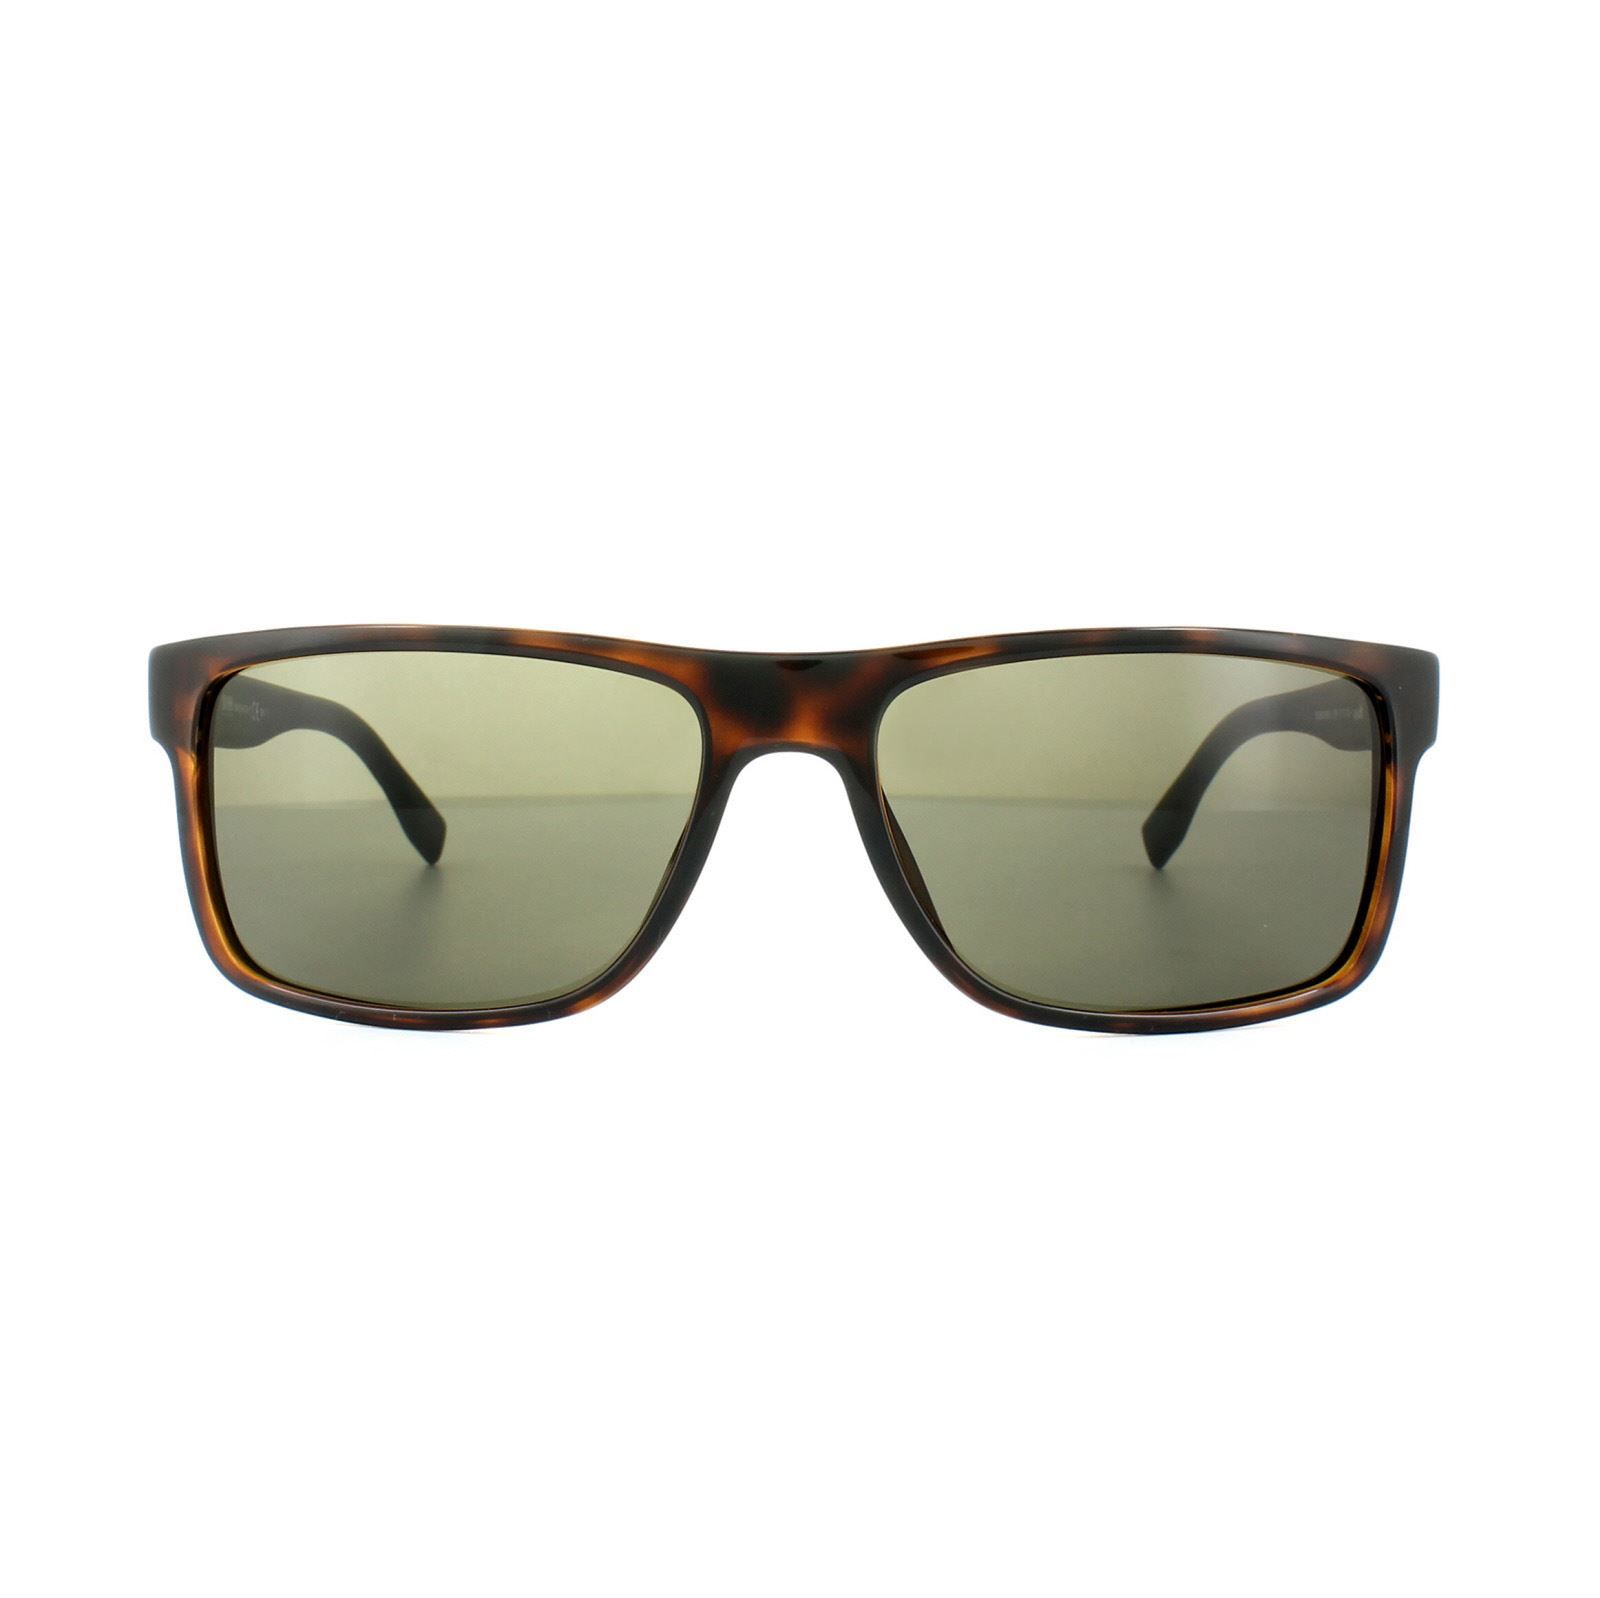 Hugo Boss Sunglasses 0919 Z2I NR Havana Black Grey are a classic rectangular style with squared off shape and typical contemporary finish from Hugo Boss. Matt finish with slightly textured finish to the temples complete the modern urban design.